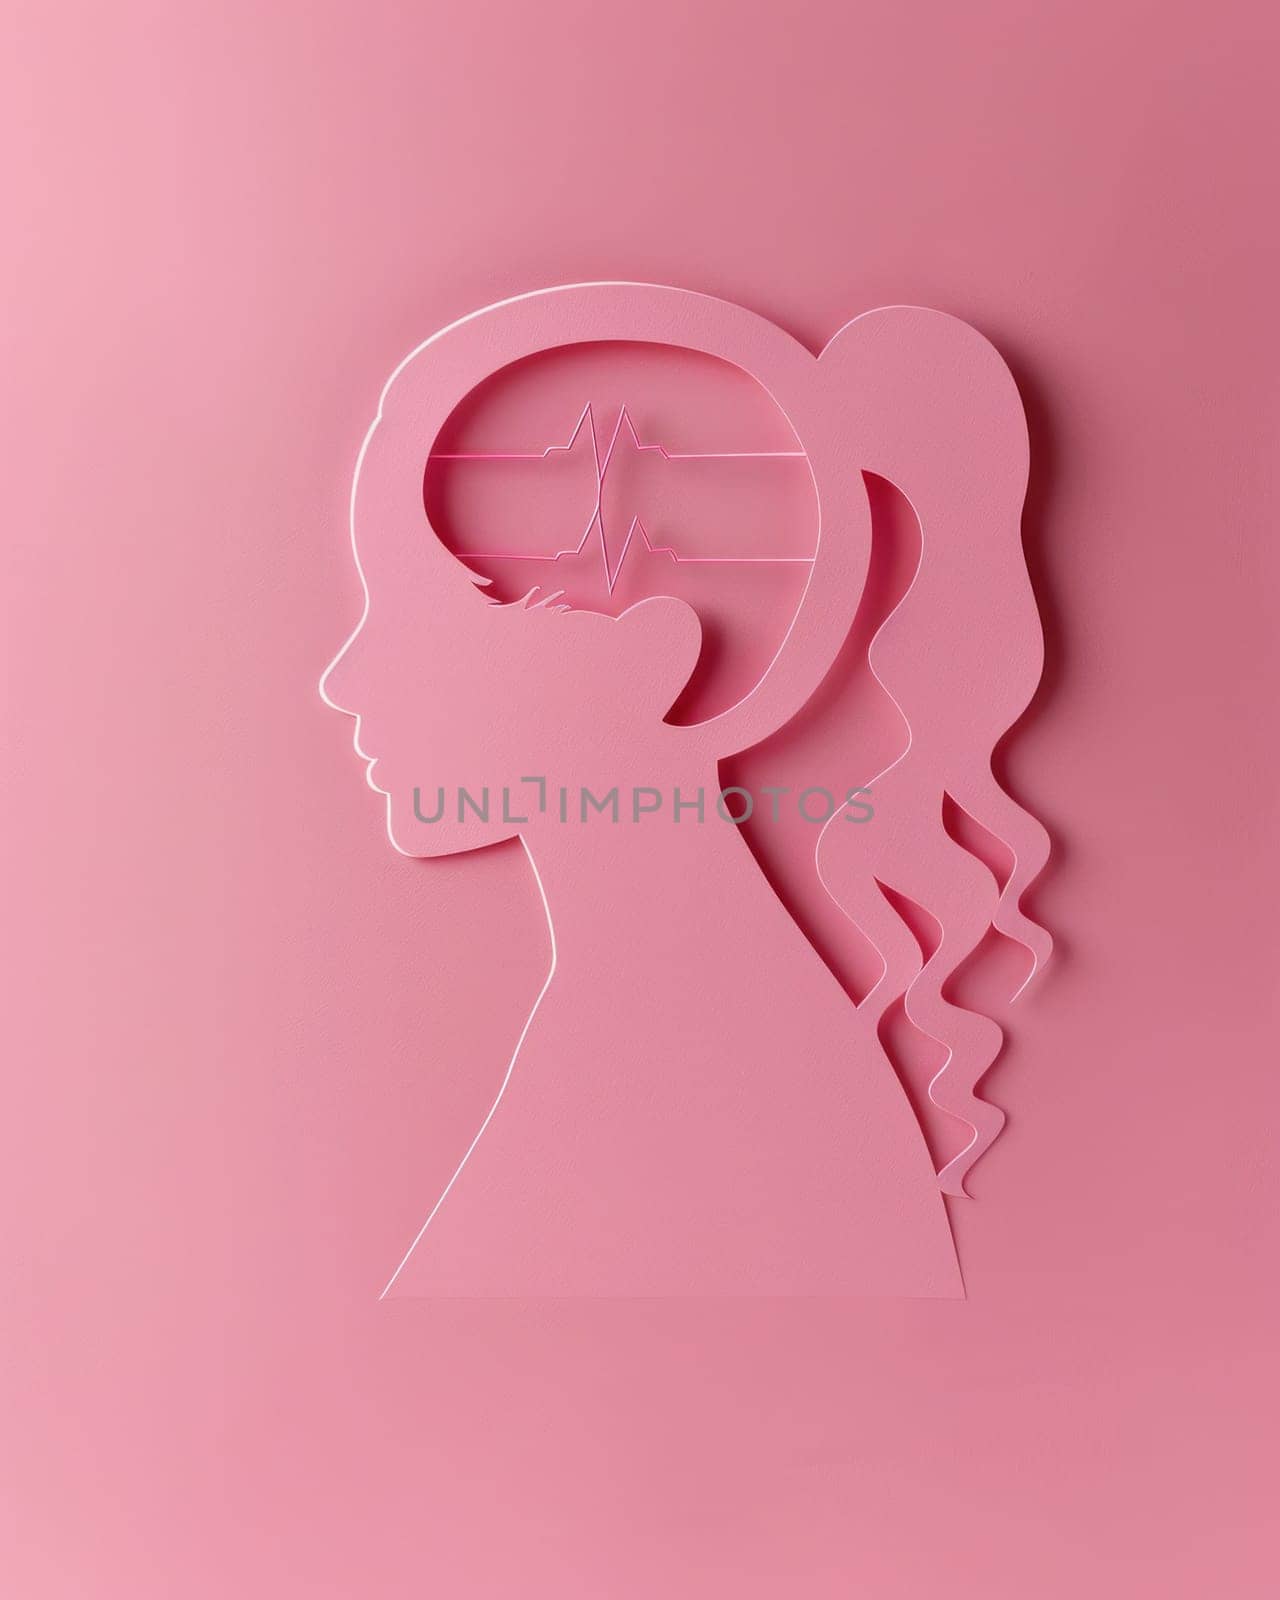 Woman's head with ponytail paper cutout on pink background beauty and fashion concept illustration by Vichizh